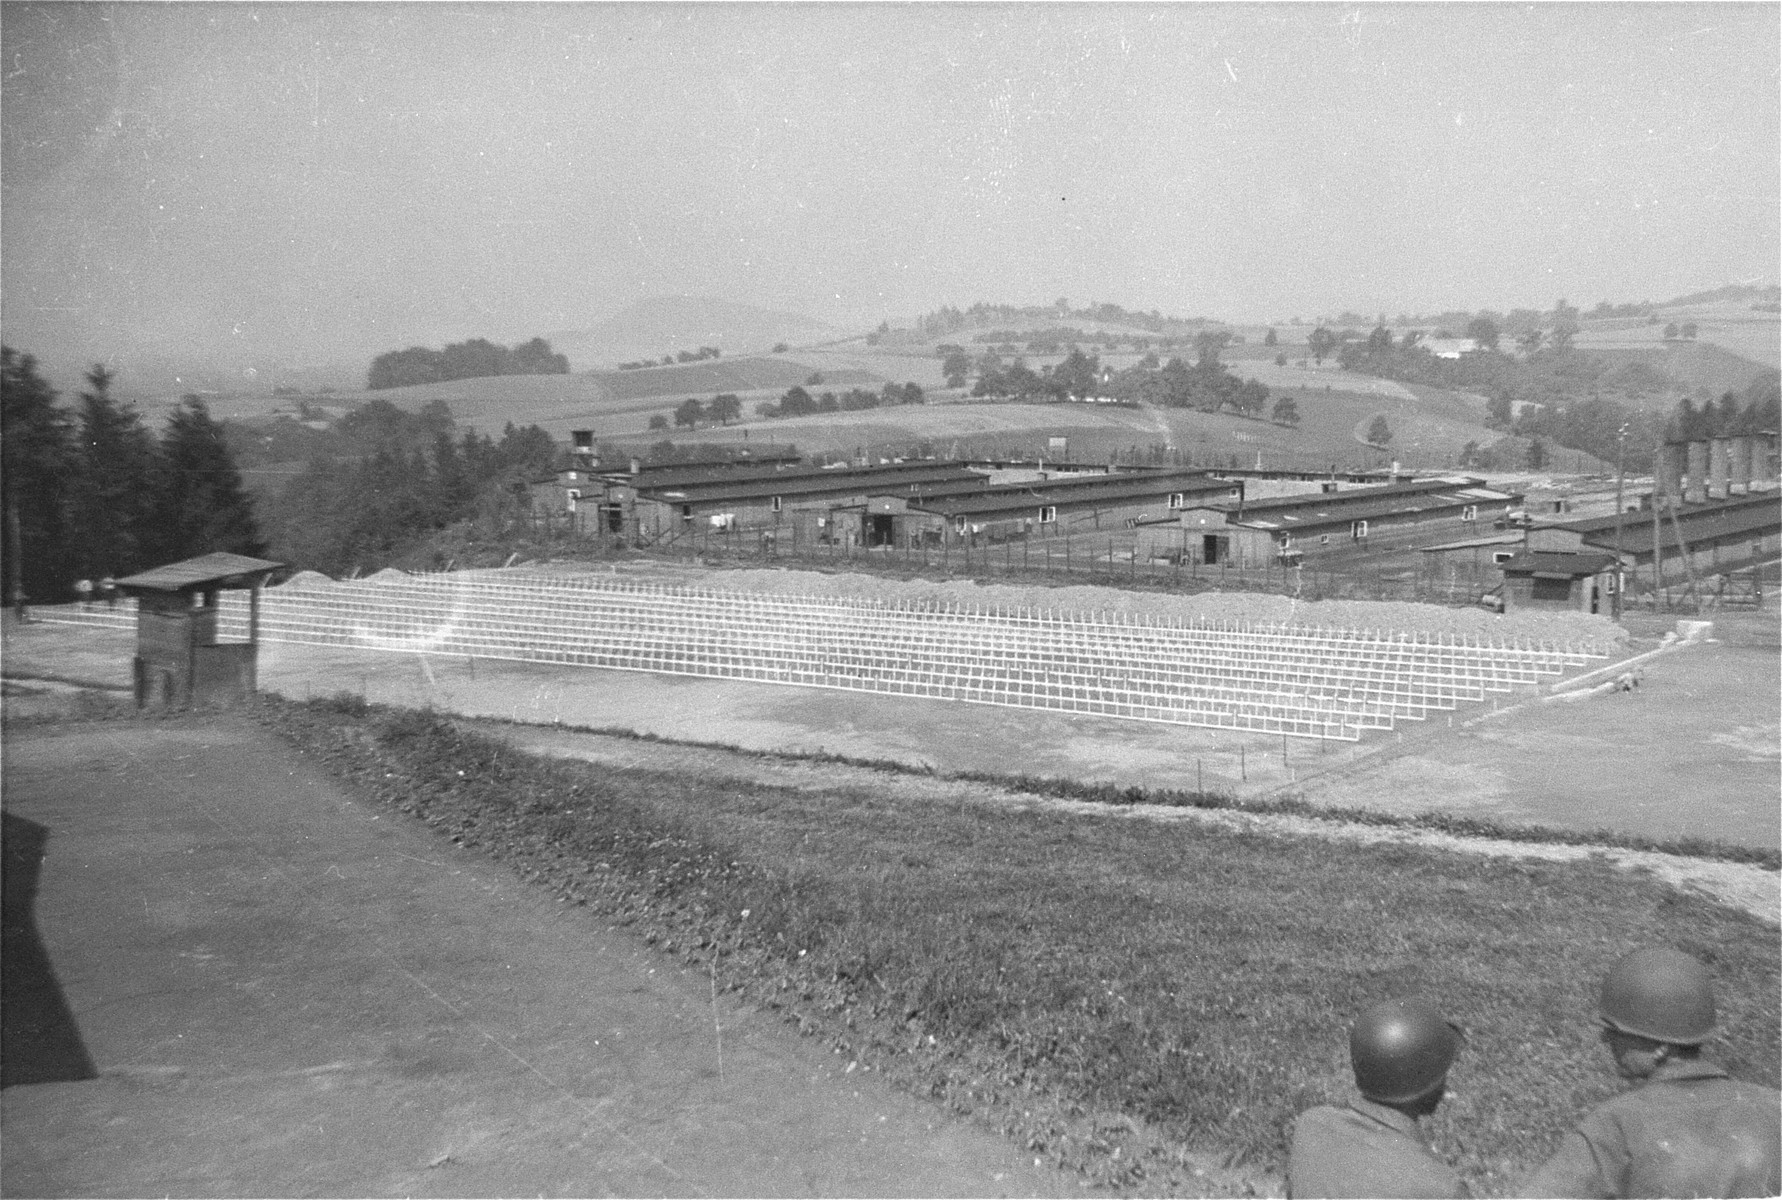 View of the cemetery at Mauthausen where nearly 3,000 corpses were buried.